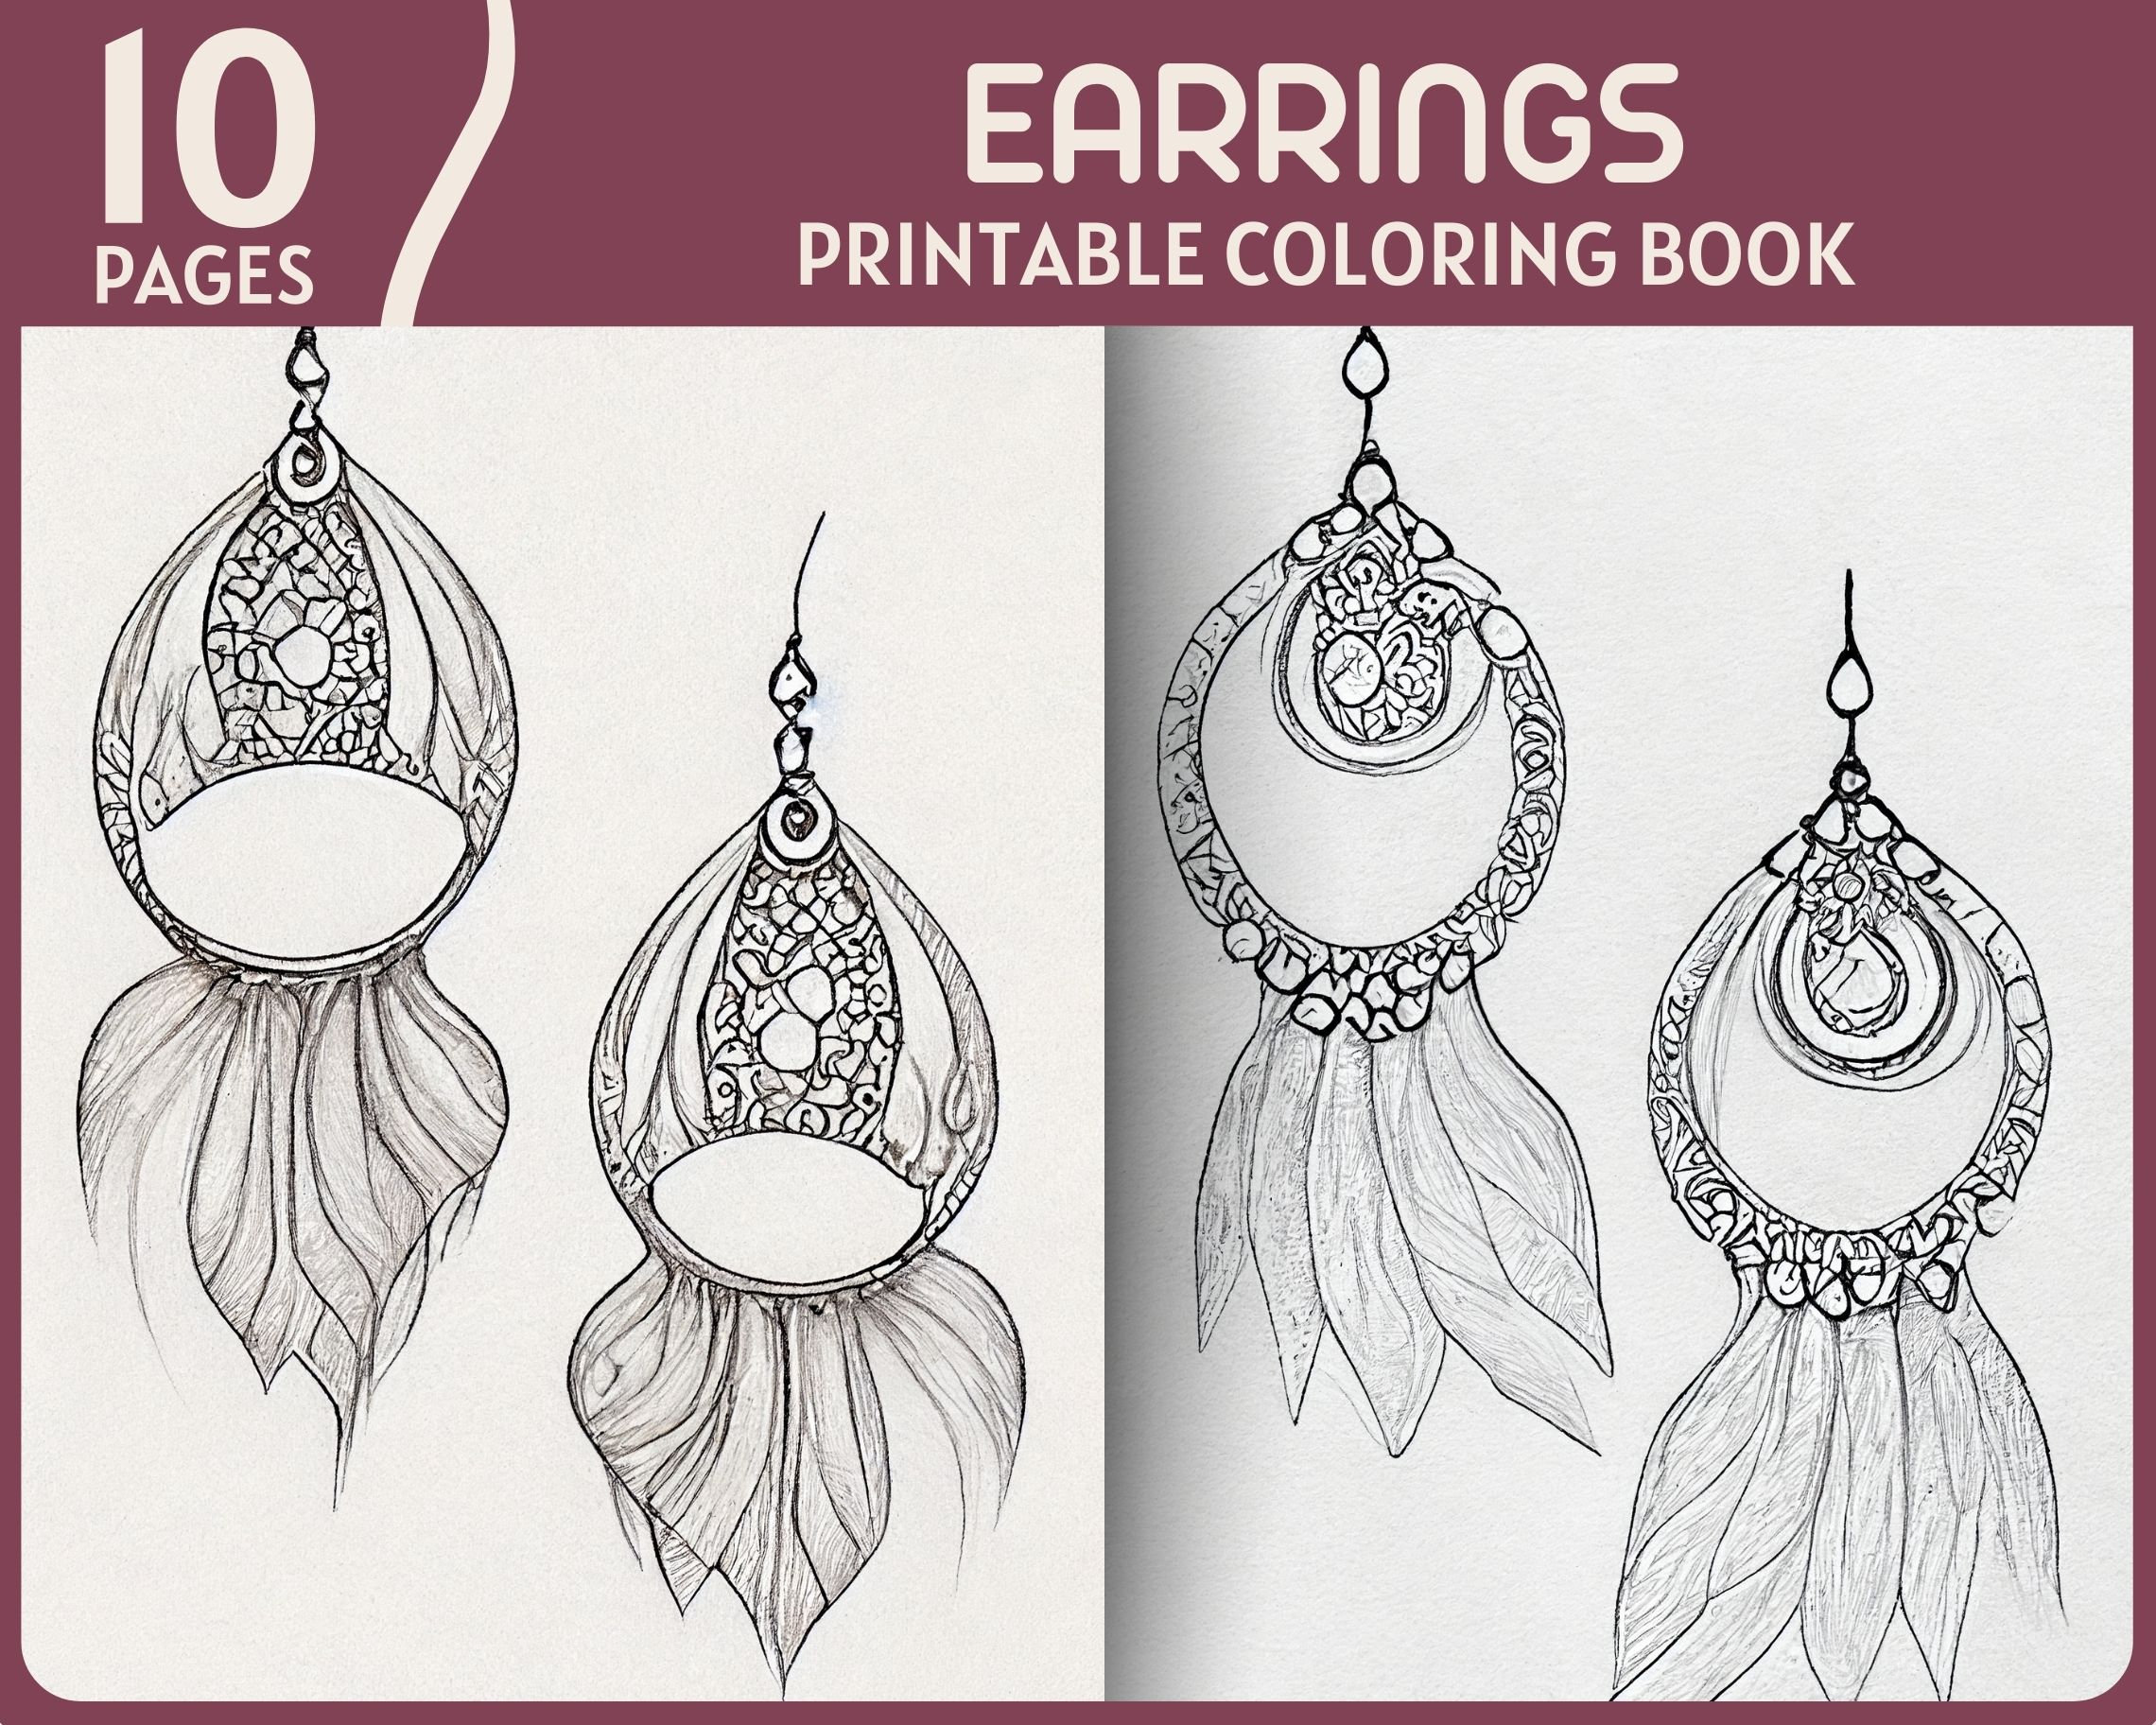 10 Earrings Coloring Pages Easy Earring Theme Printable Coloring Book  Jewelry Drawings - Etsy